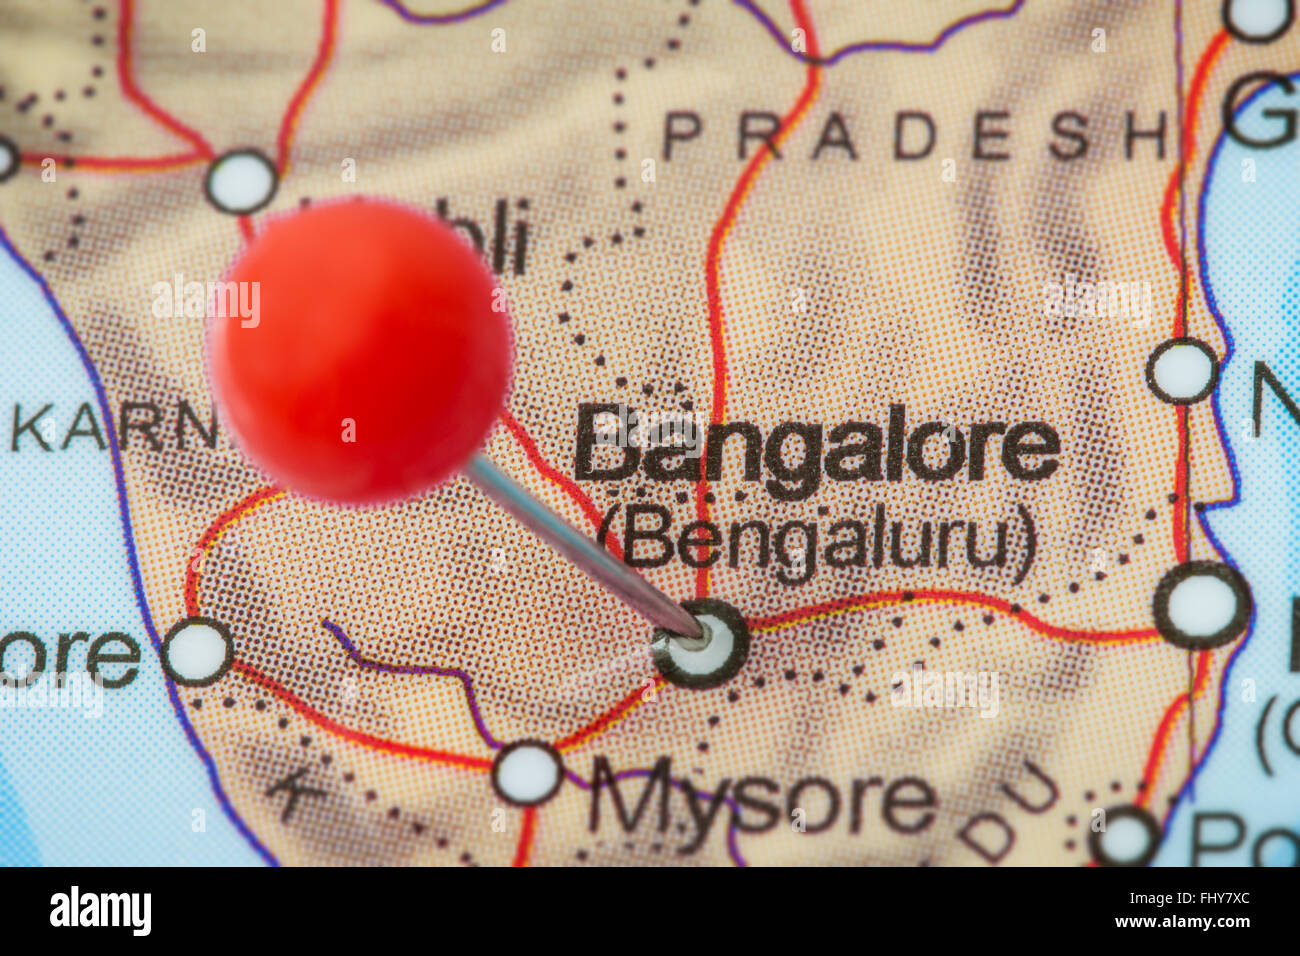 Close-up of a red pushpin in a map of Bangalore, India. Stock Photo